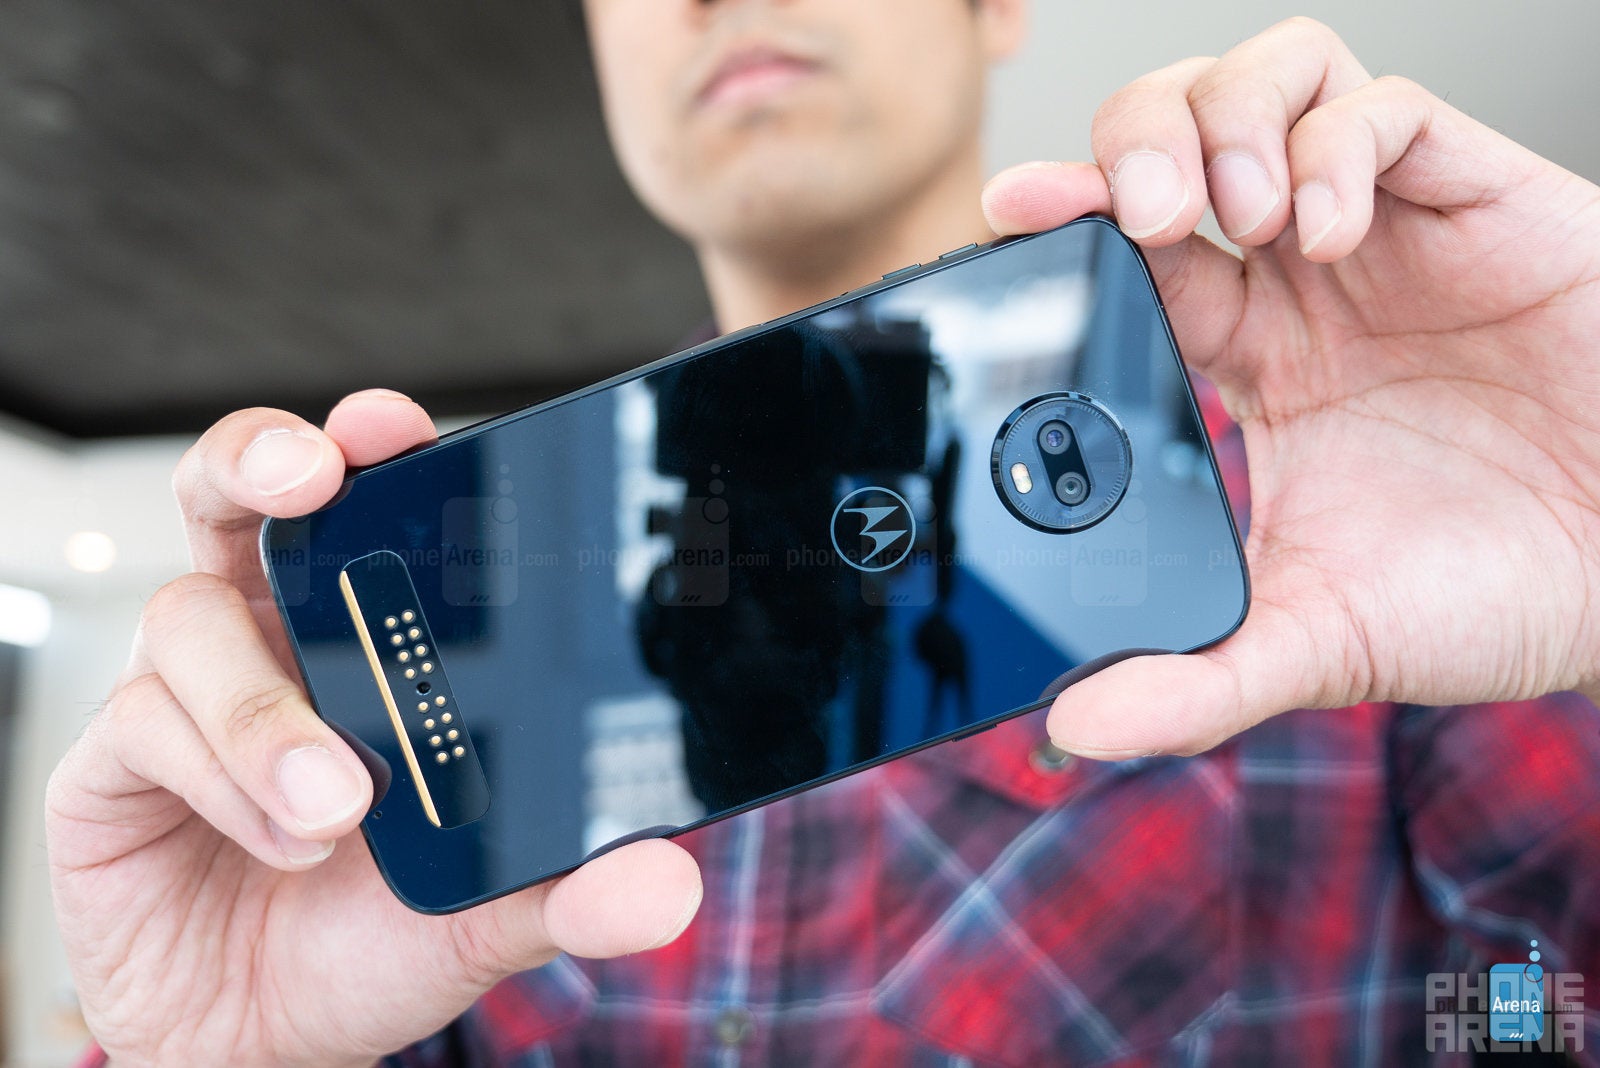 Moto Z3 Play hands-on: a tougher sell this time around